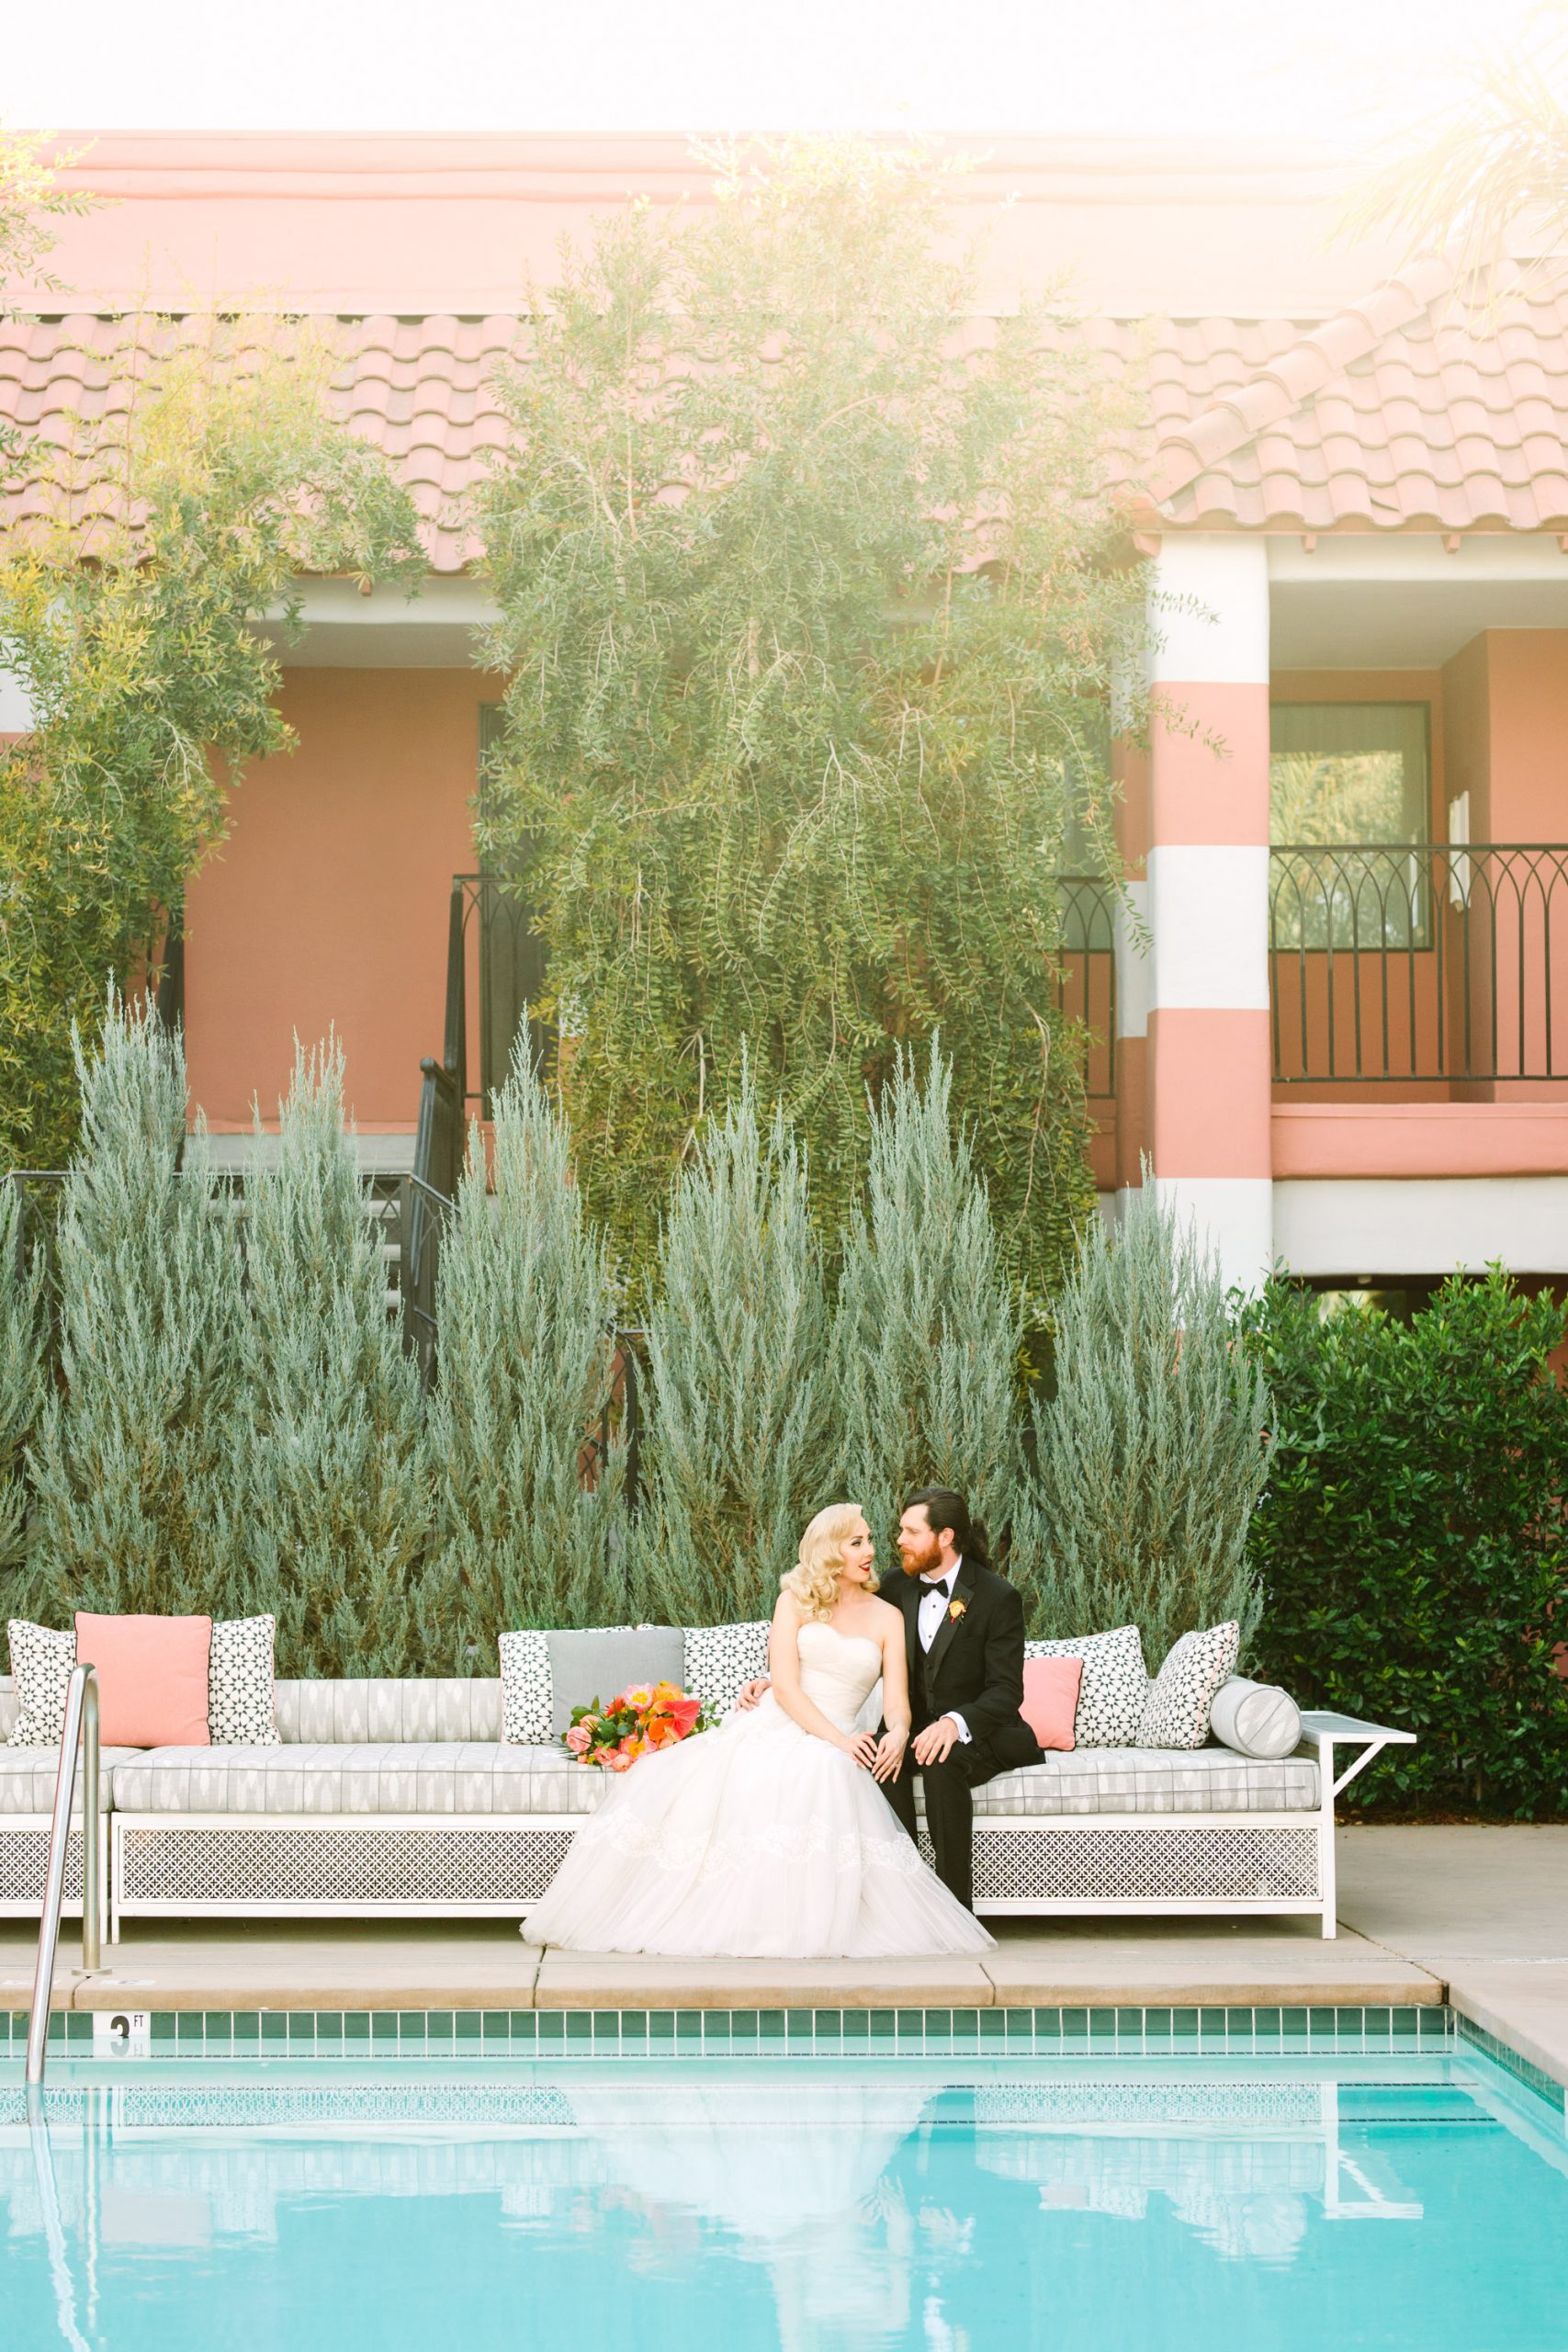 Bride and groom by pool at Sands Hotel - www.marycostaweddings.com